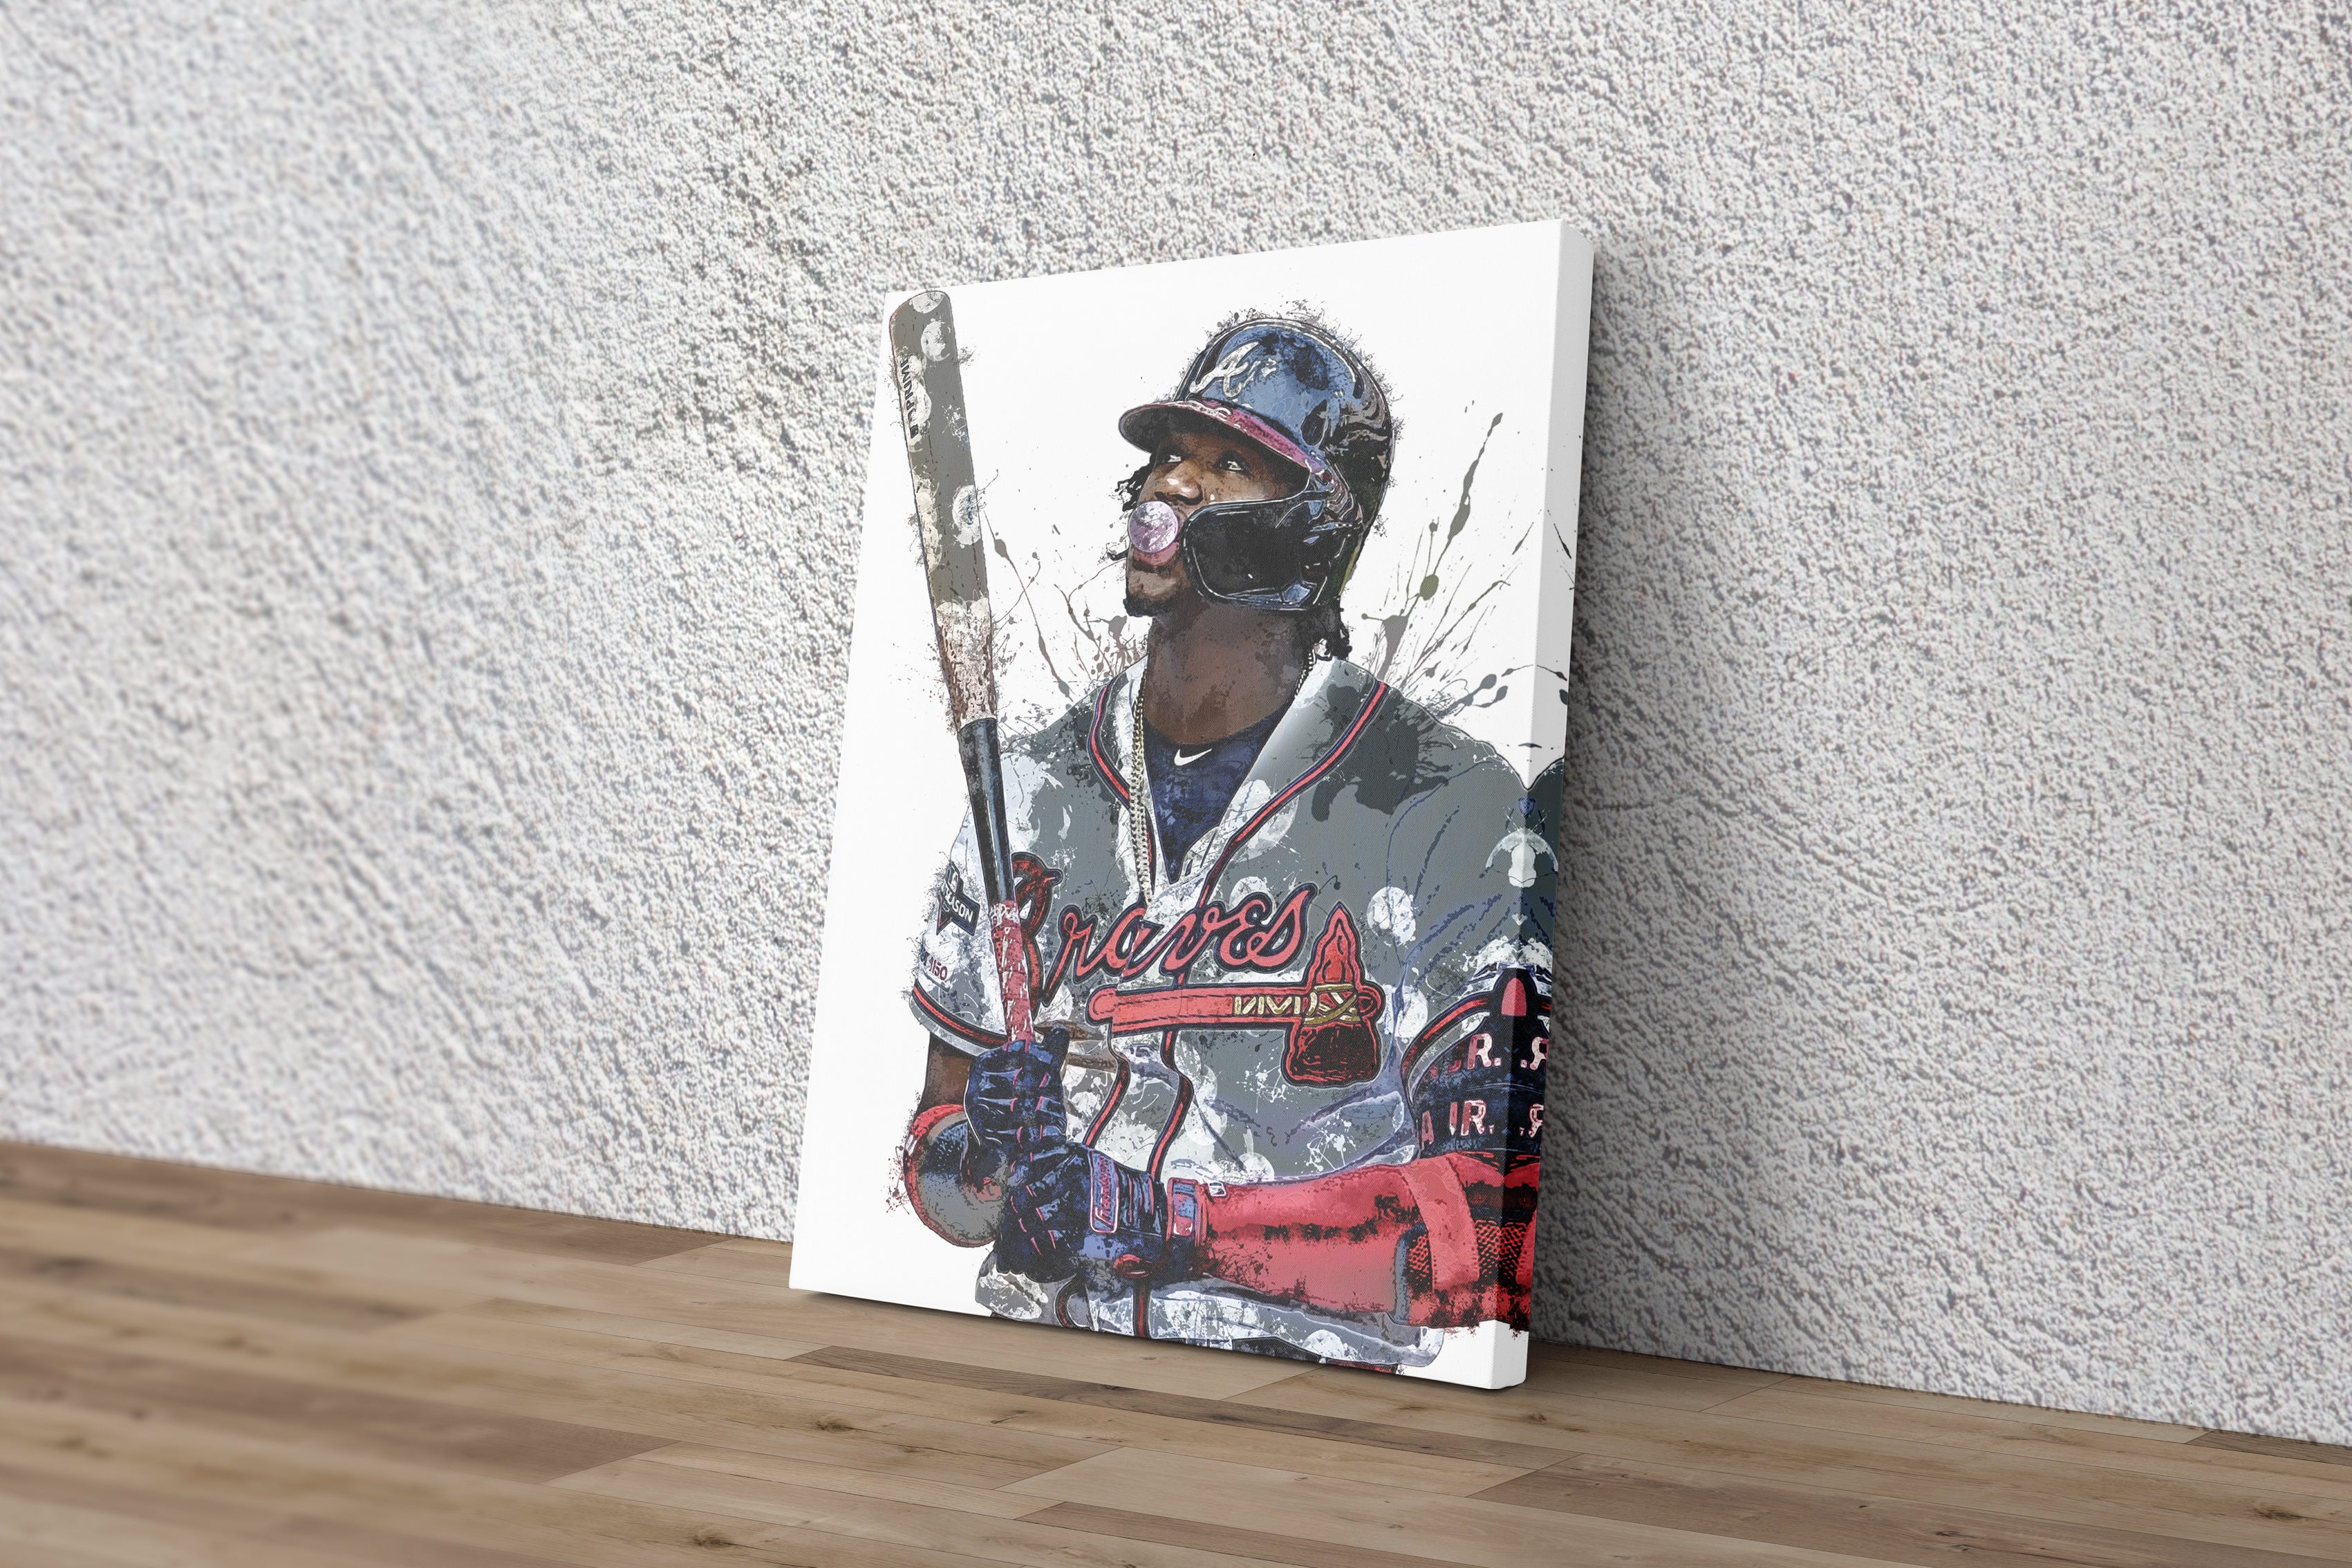 Ronald Acuna Jr Poster Baseball Art (10) Print Photo Art Painting Canvas  Poster Home Decorative Bedroom Modern Decor Posters Gifts 08x12inch(20x30cm)